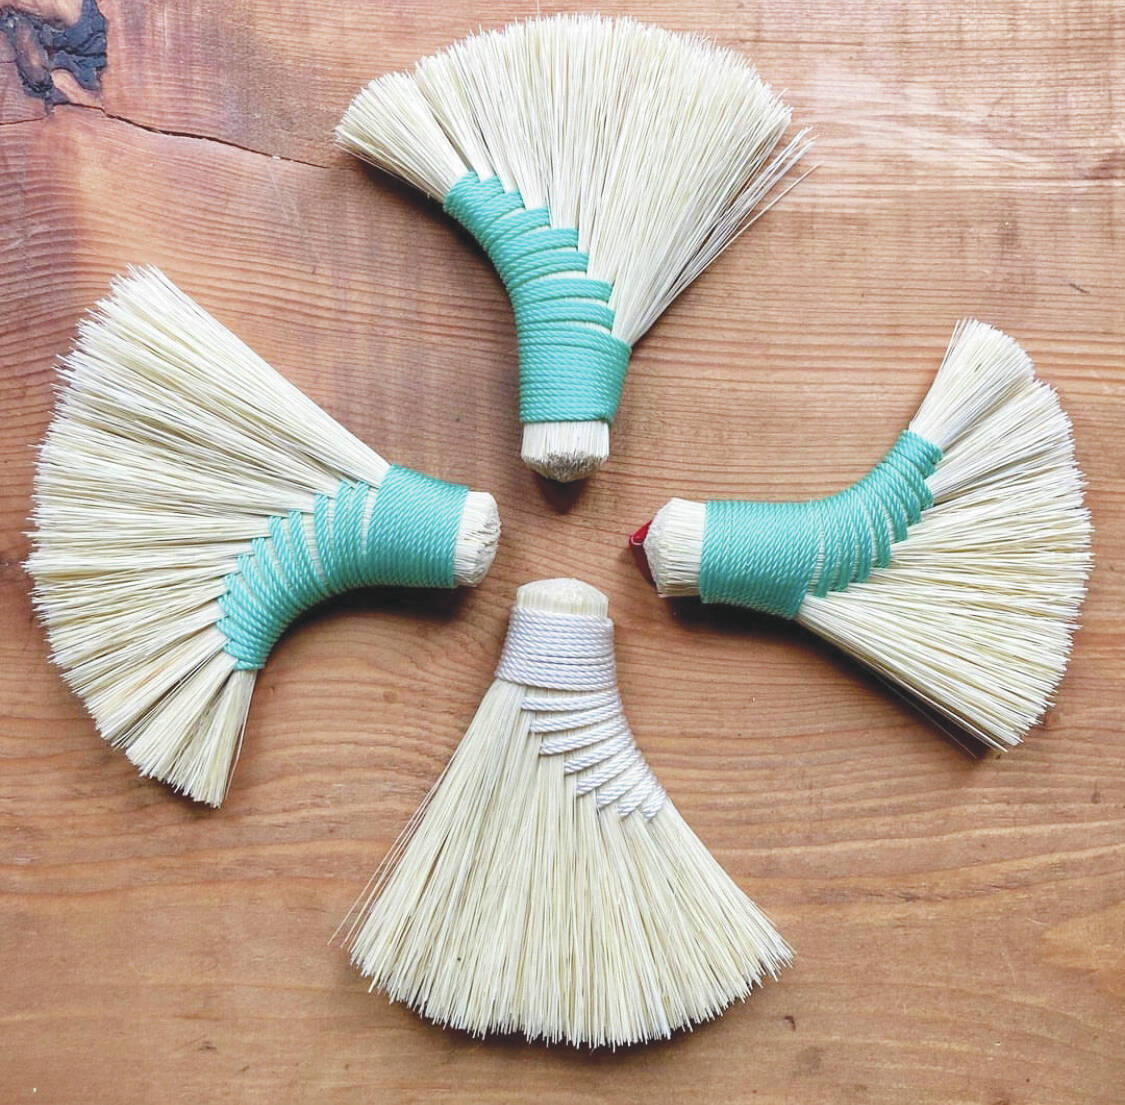 Photo by Willow Q. Jones/courtesy
Handmade turkey wing and turkey tail style brooms by Willow Q Jones made in her home studio in Homer in August 2022.